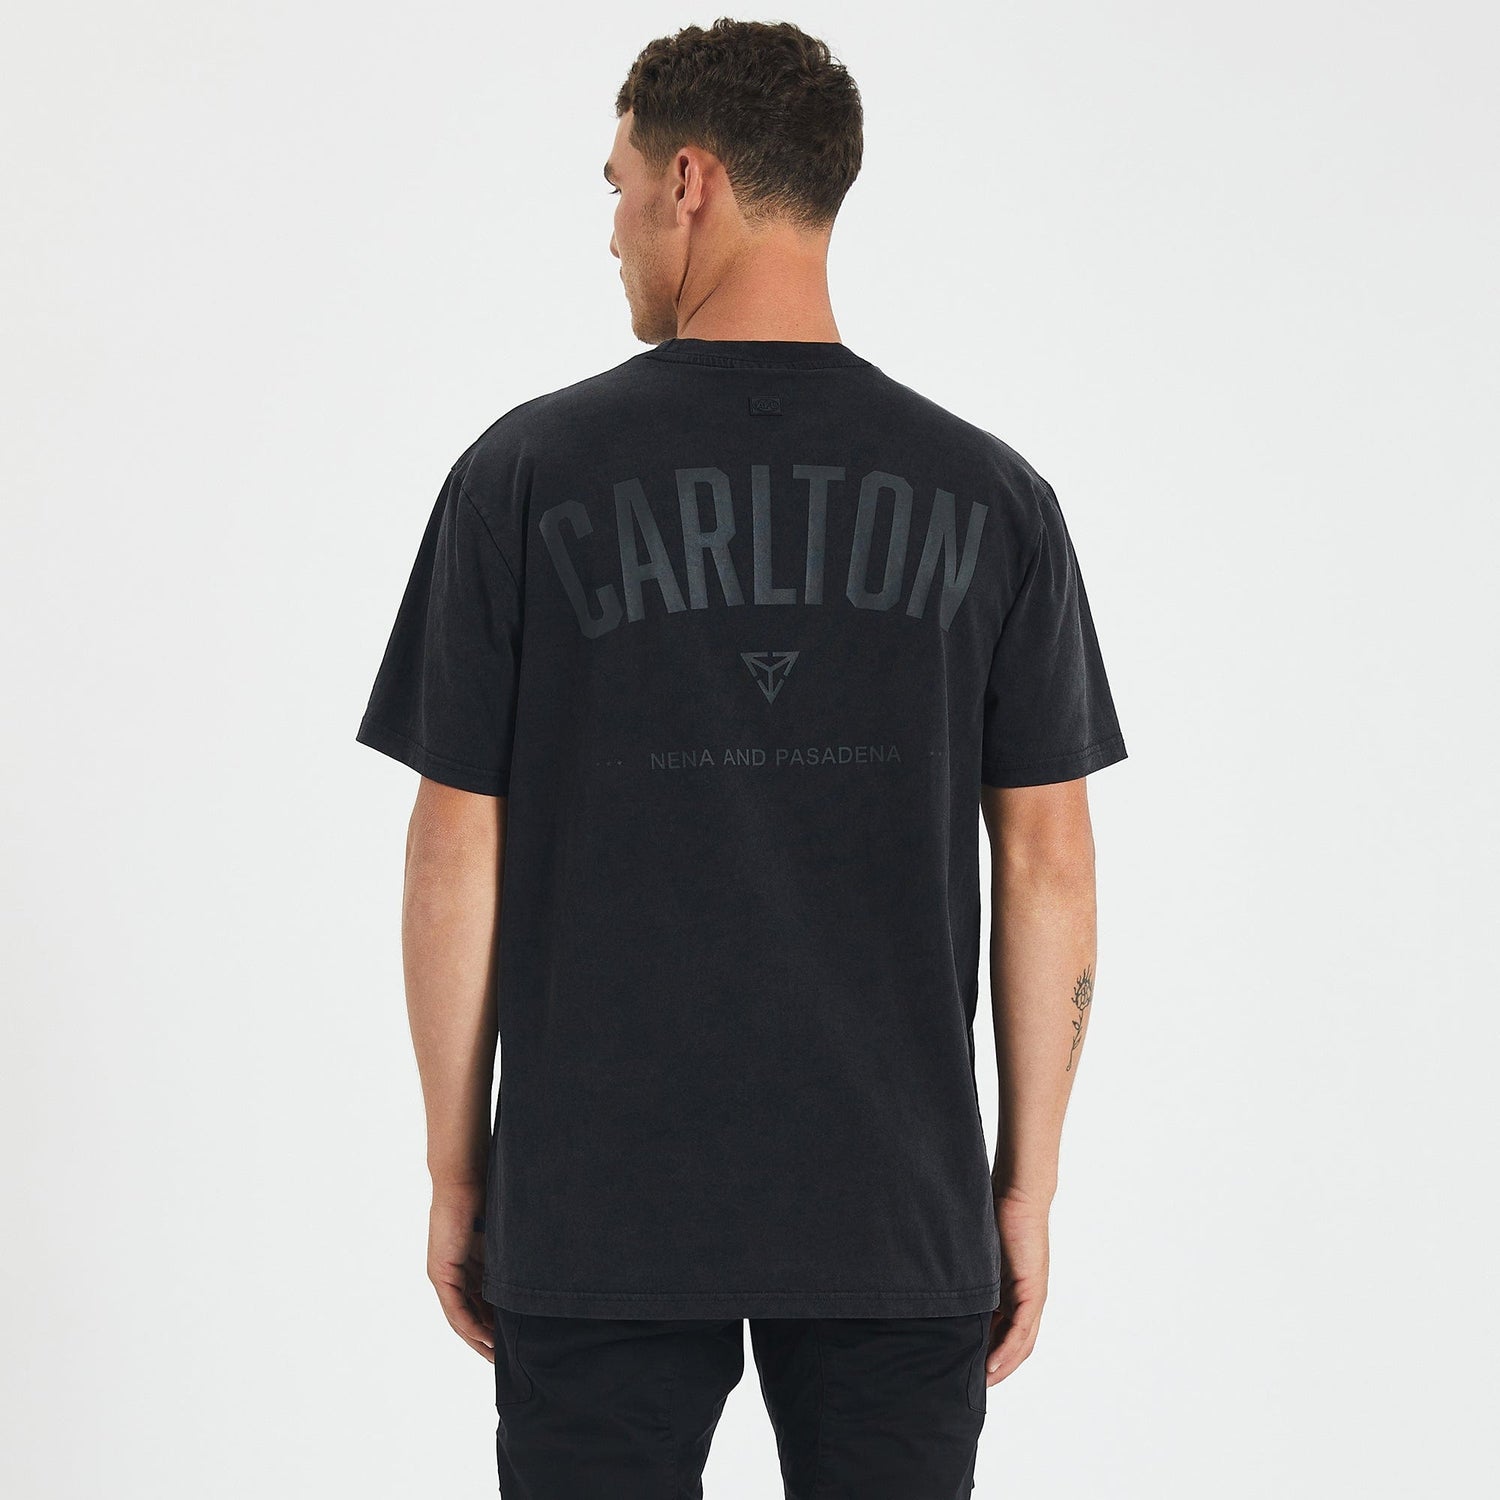 Carlton Blues Relaxed Fit T-Shirt Mineral Black